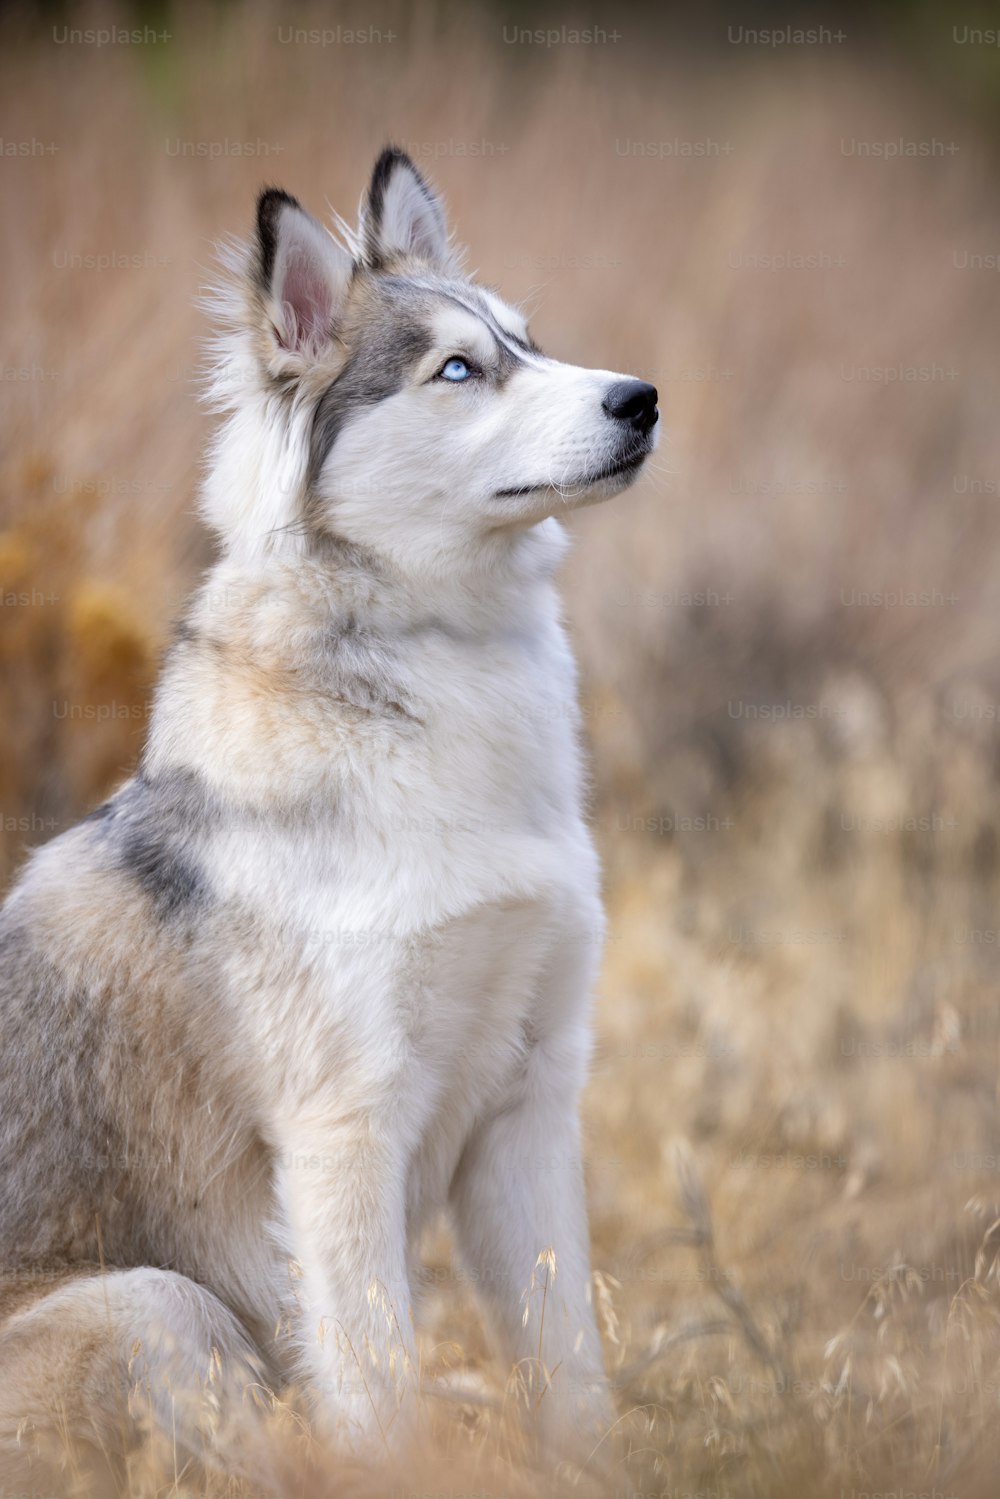 a husky dog sitting in a field of dry grass